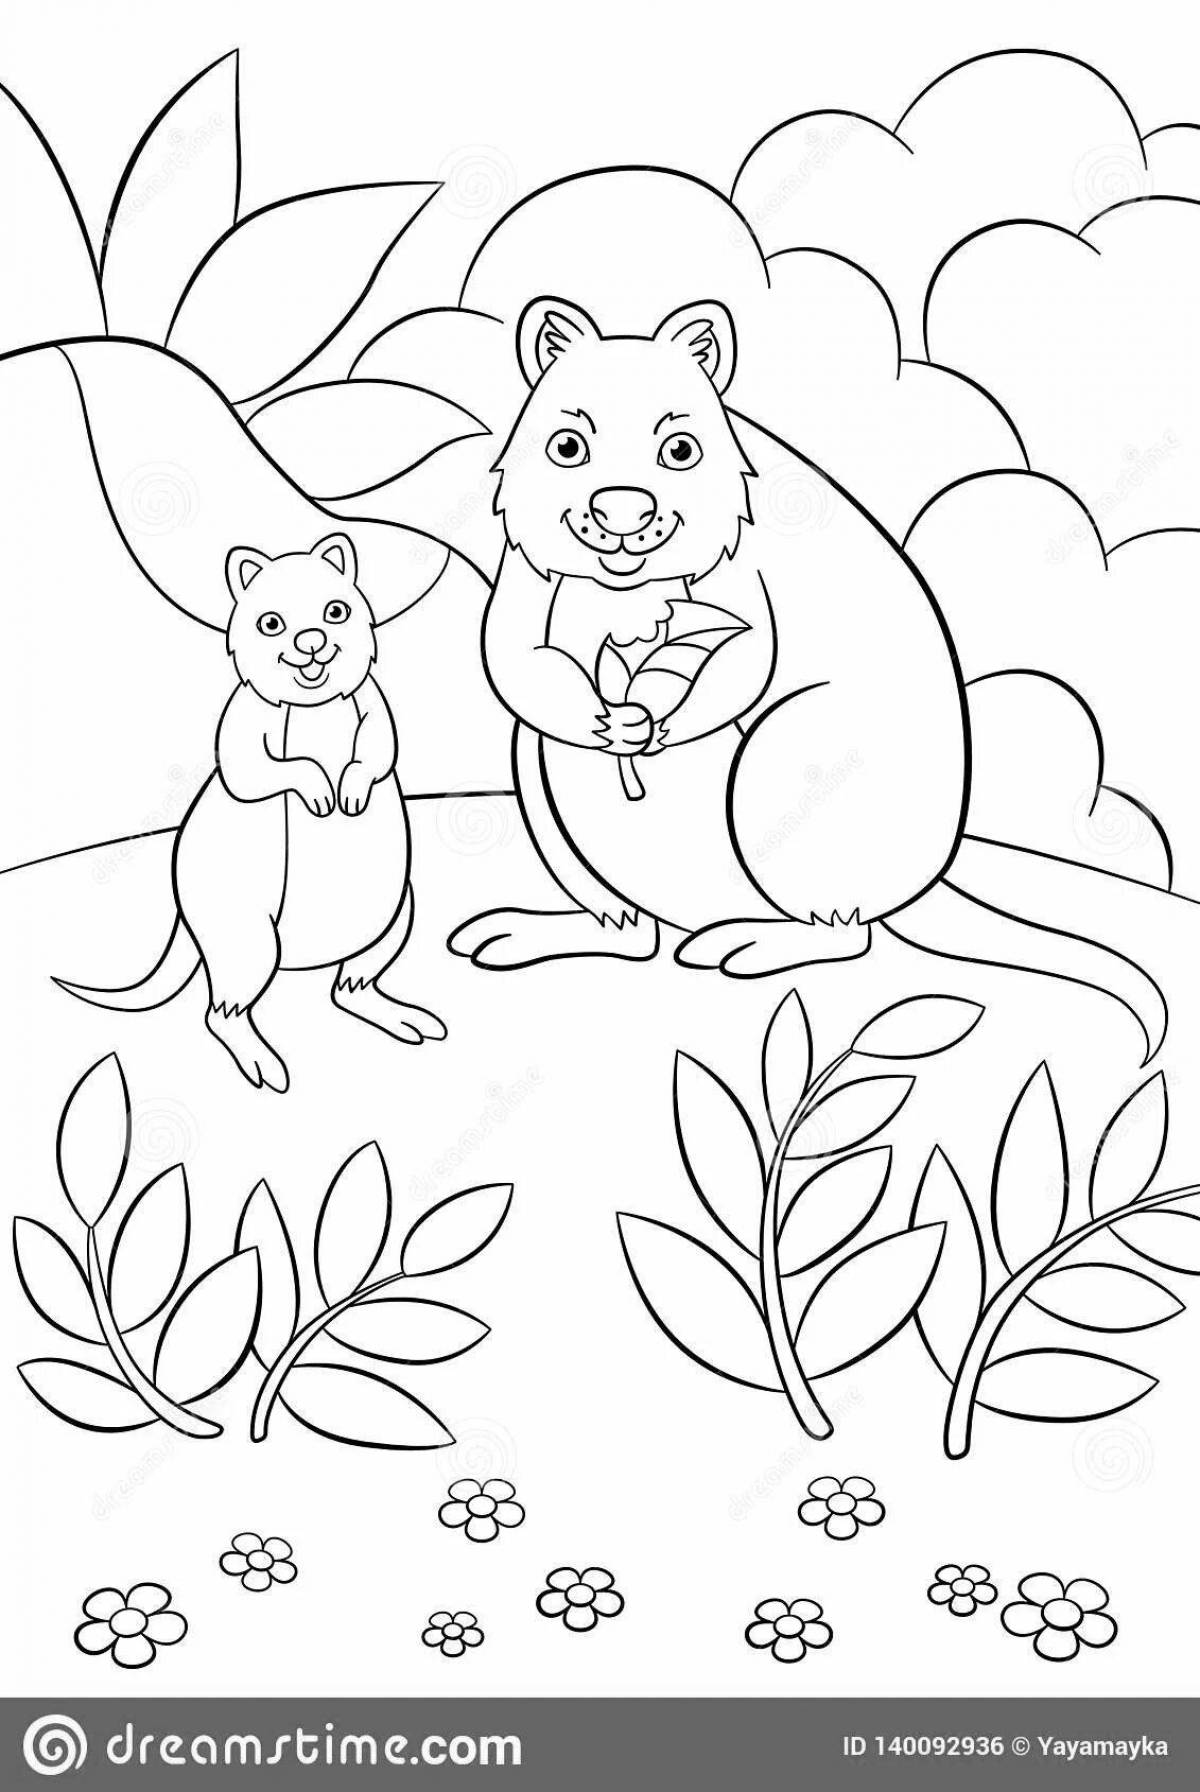 Blissful quokka coloring book